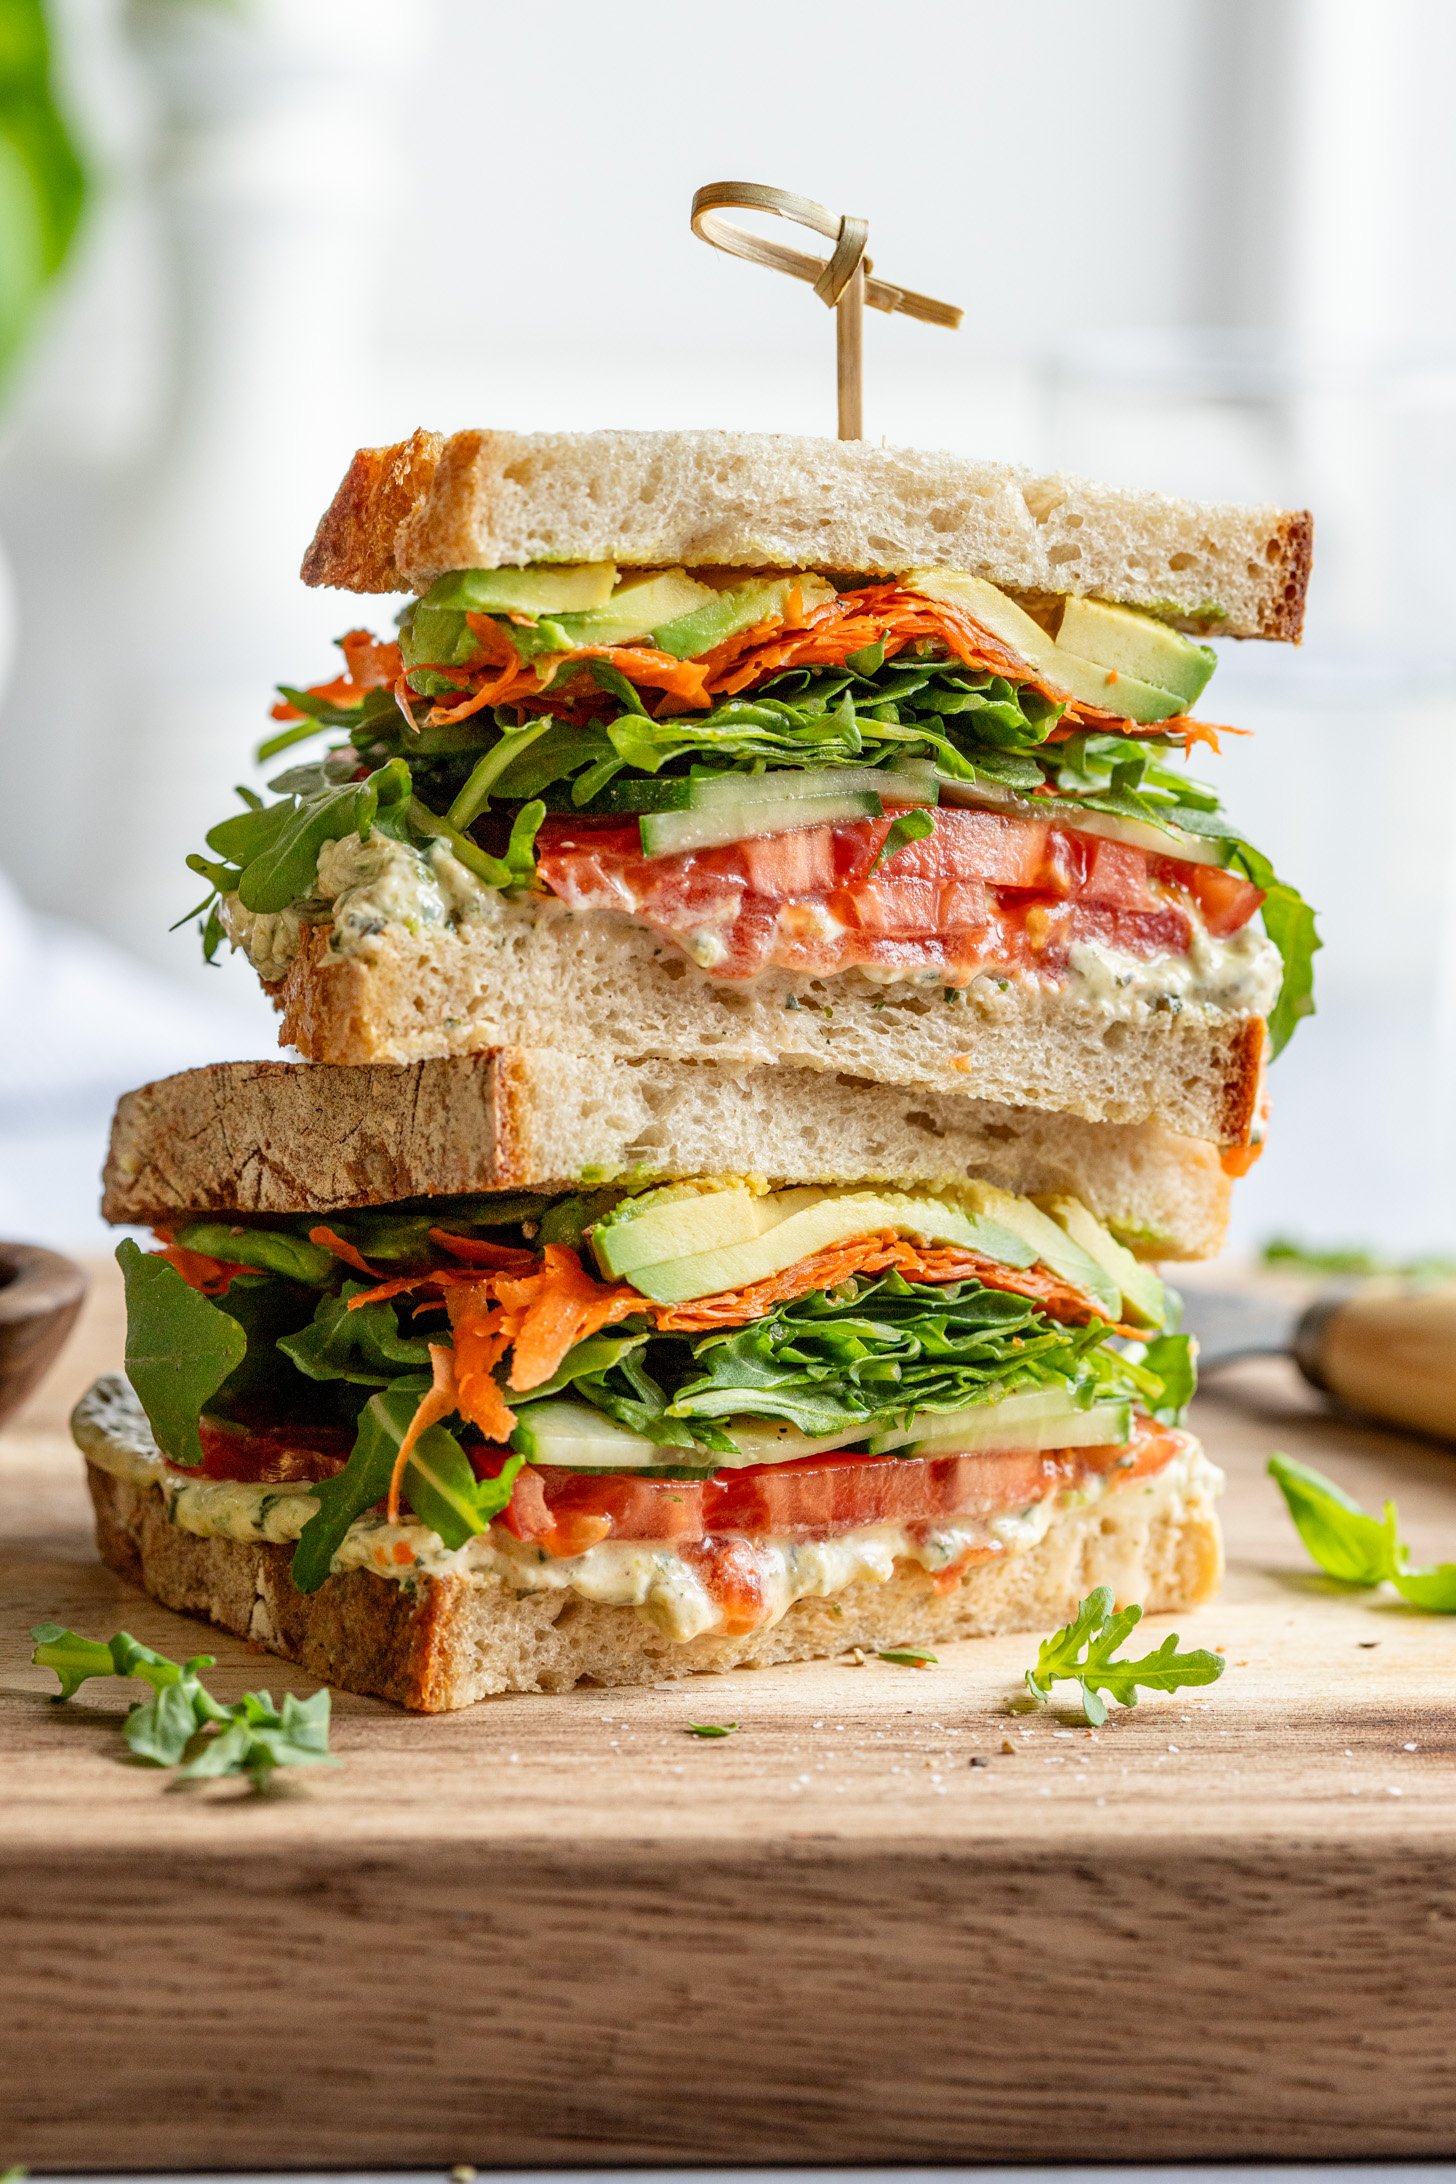 Two halves of a sandwich filled with vegetables and pesto cream cheese stacked on top of each other sitting on a wooden cutting board. There is a wooden food pick speared through the stacked sandwich halves and the sandwiches are surrounded by pieces of greens, and  bowl and knife (out of focus and slightly out of frame)